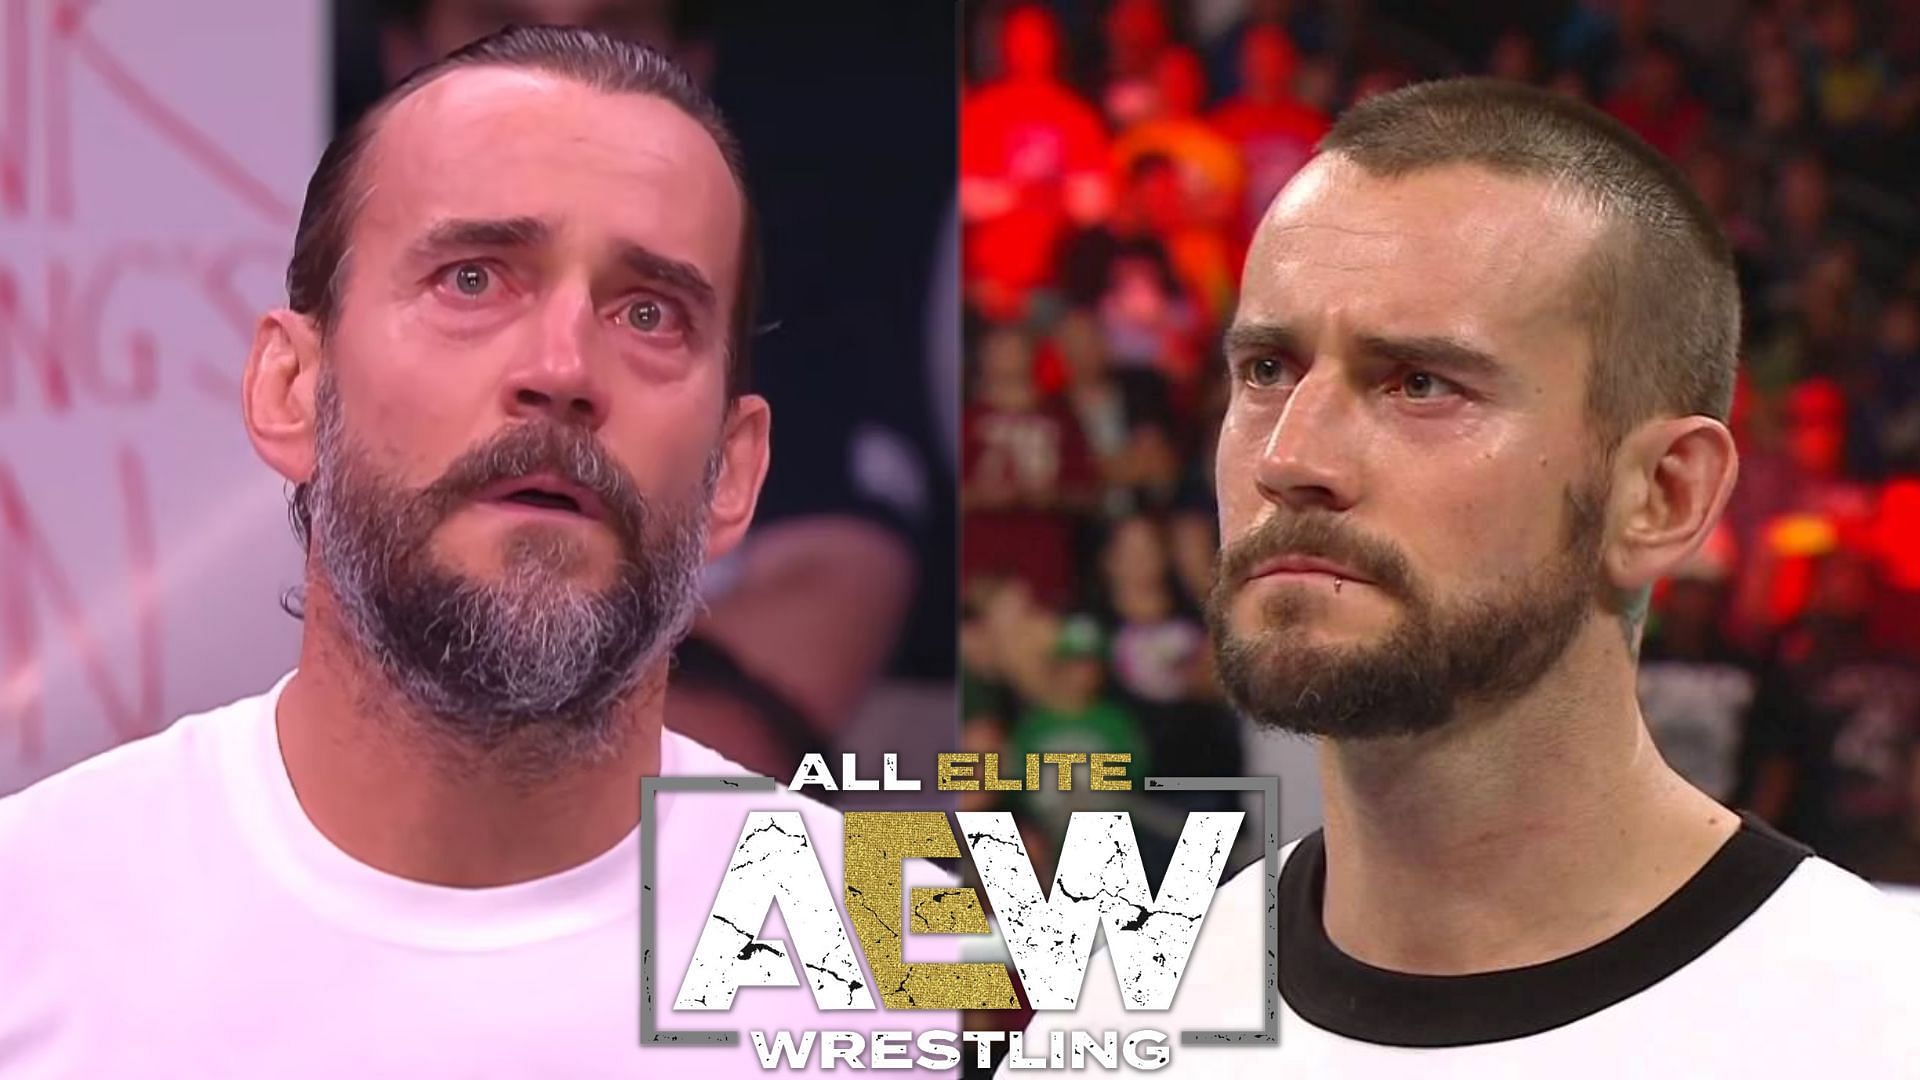 What future is left in AEW for the former Voice of the Voiceless?